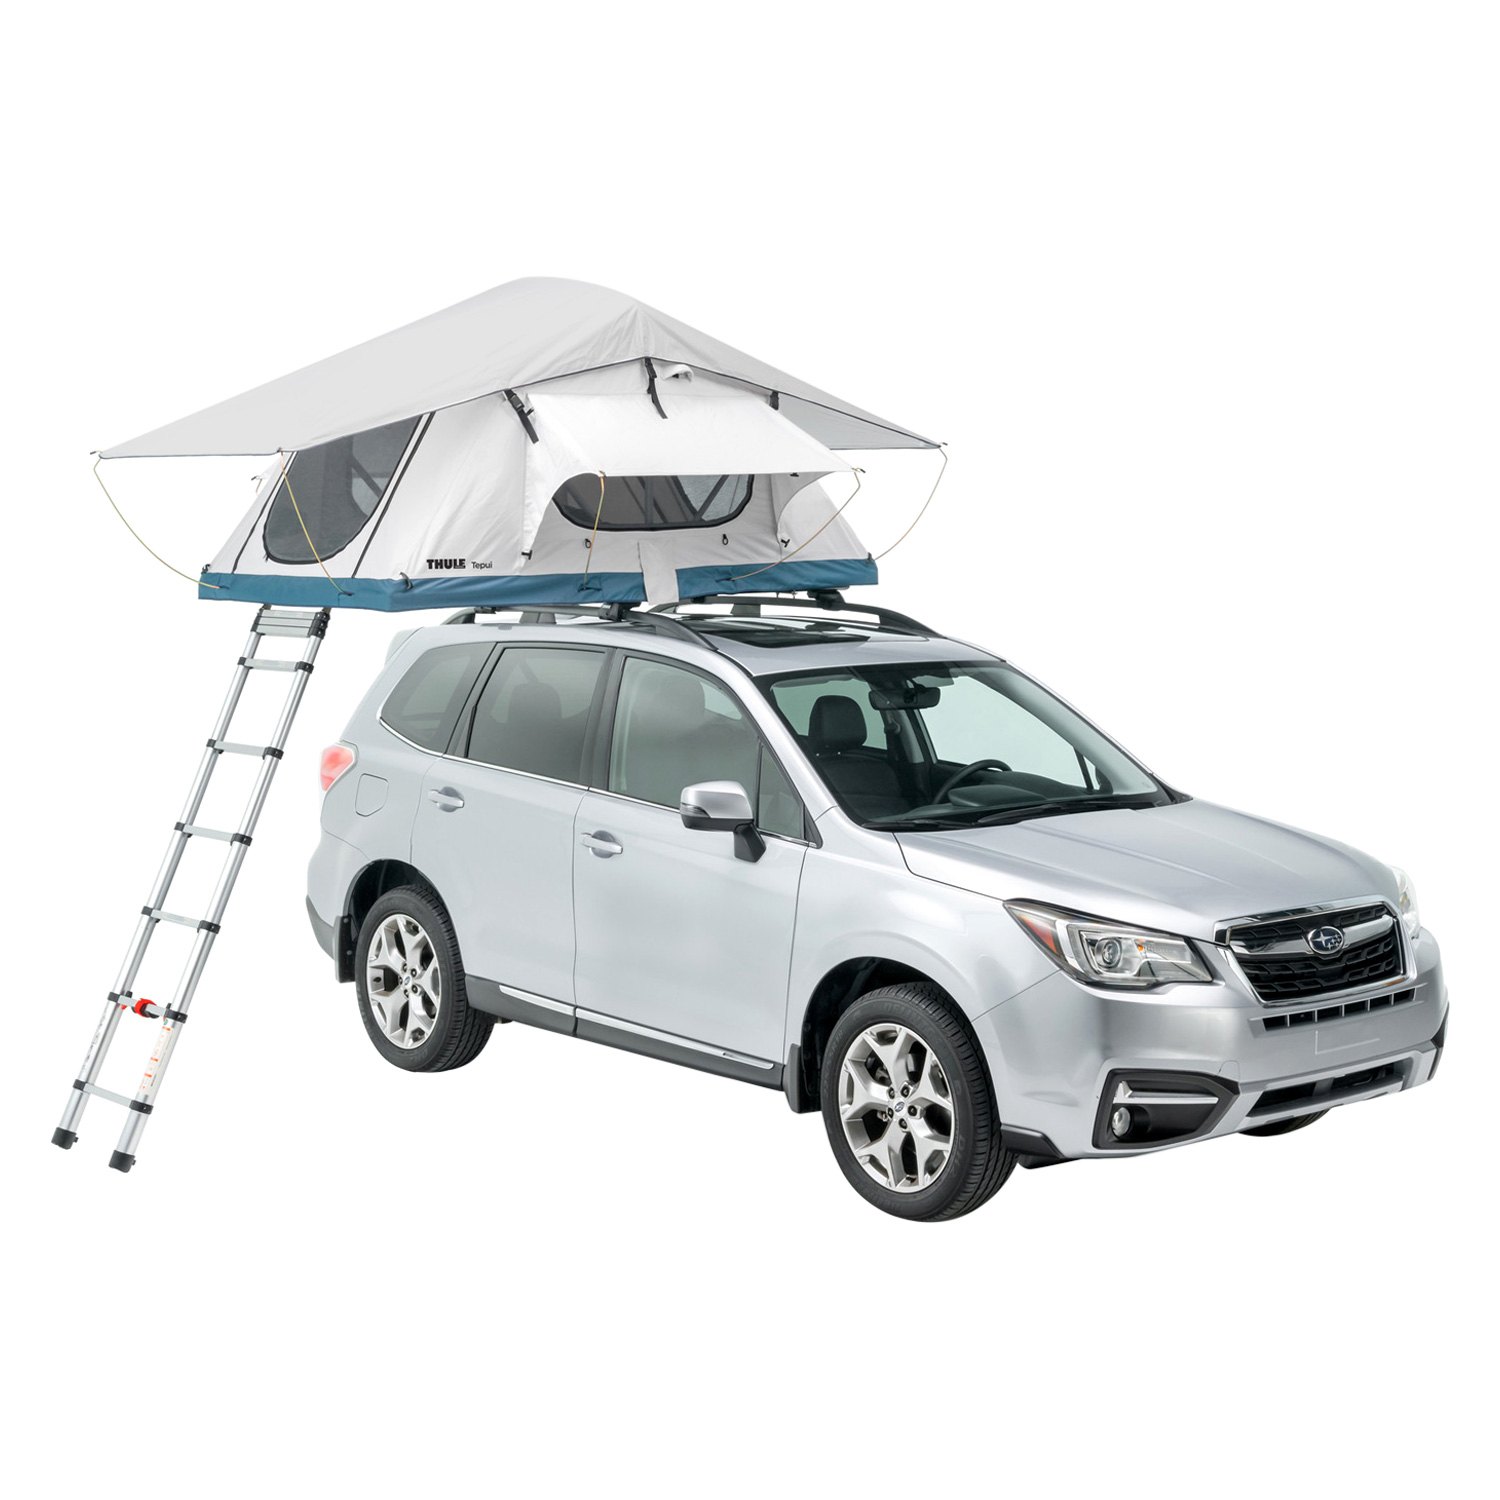 Best Discounts on Awesome Thule Roof Top Tents for your Crossover